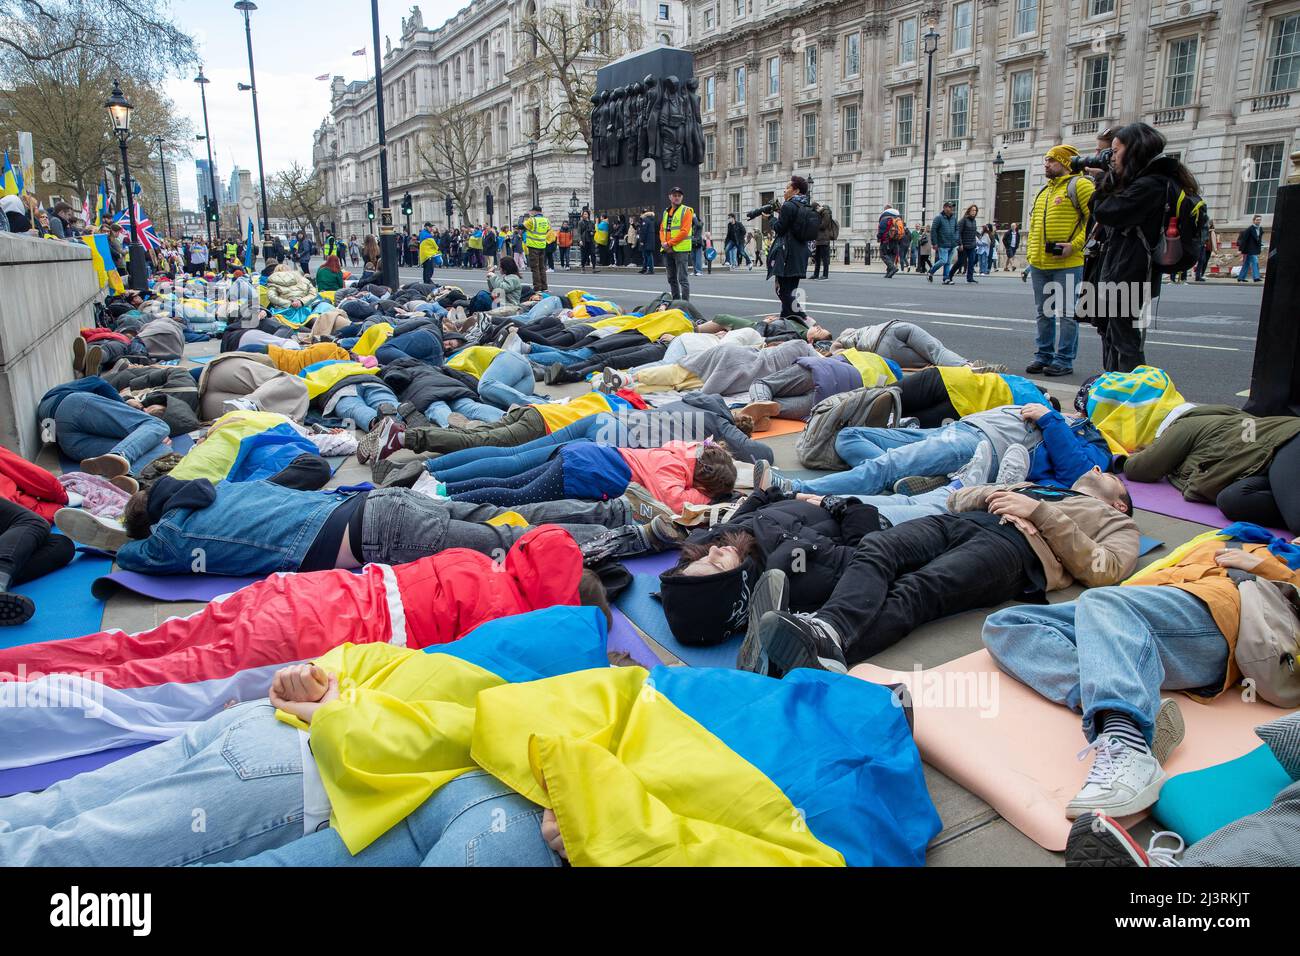 LONDON, APRIL 09 2022, Ukrainian protesters demonstrate against the Russian invasion of Ukraine outside Downing Street on Whitehall, London. Stock Photo